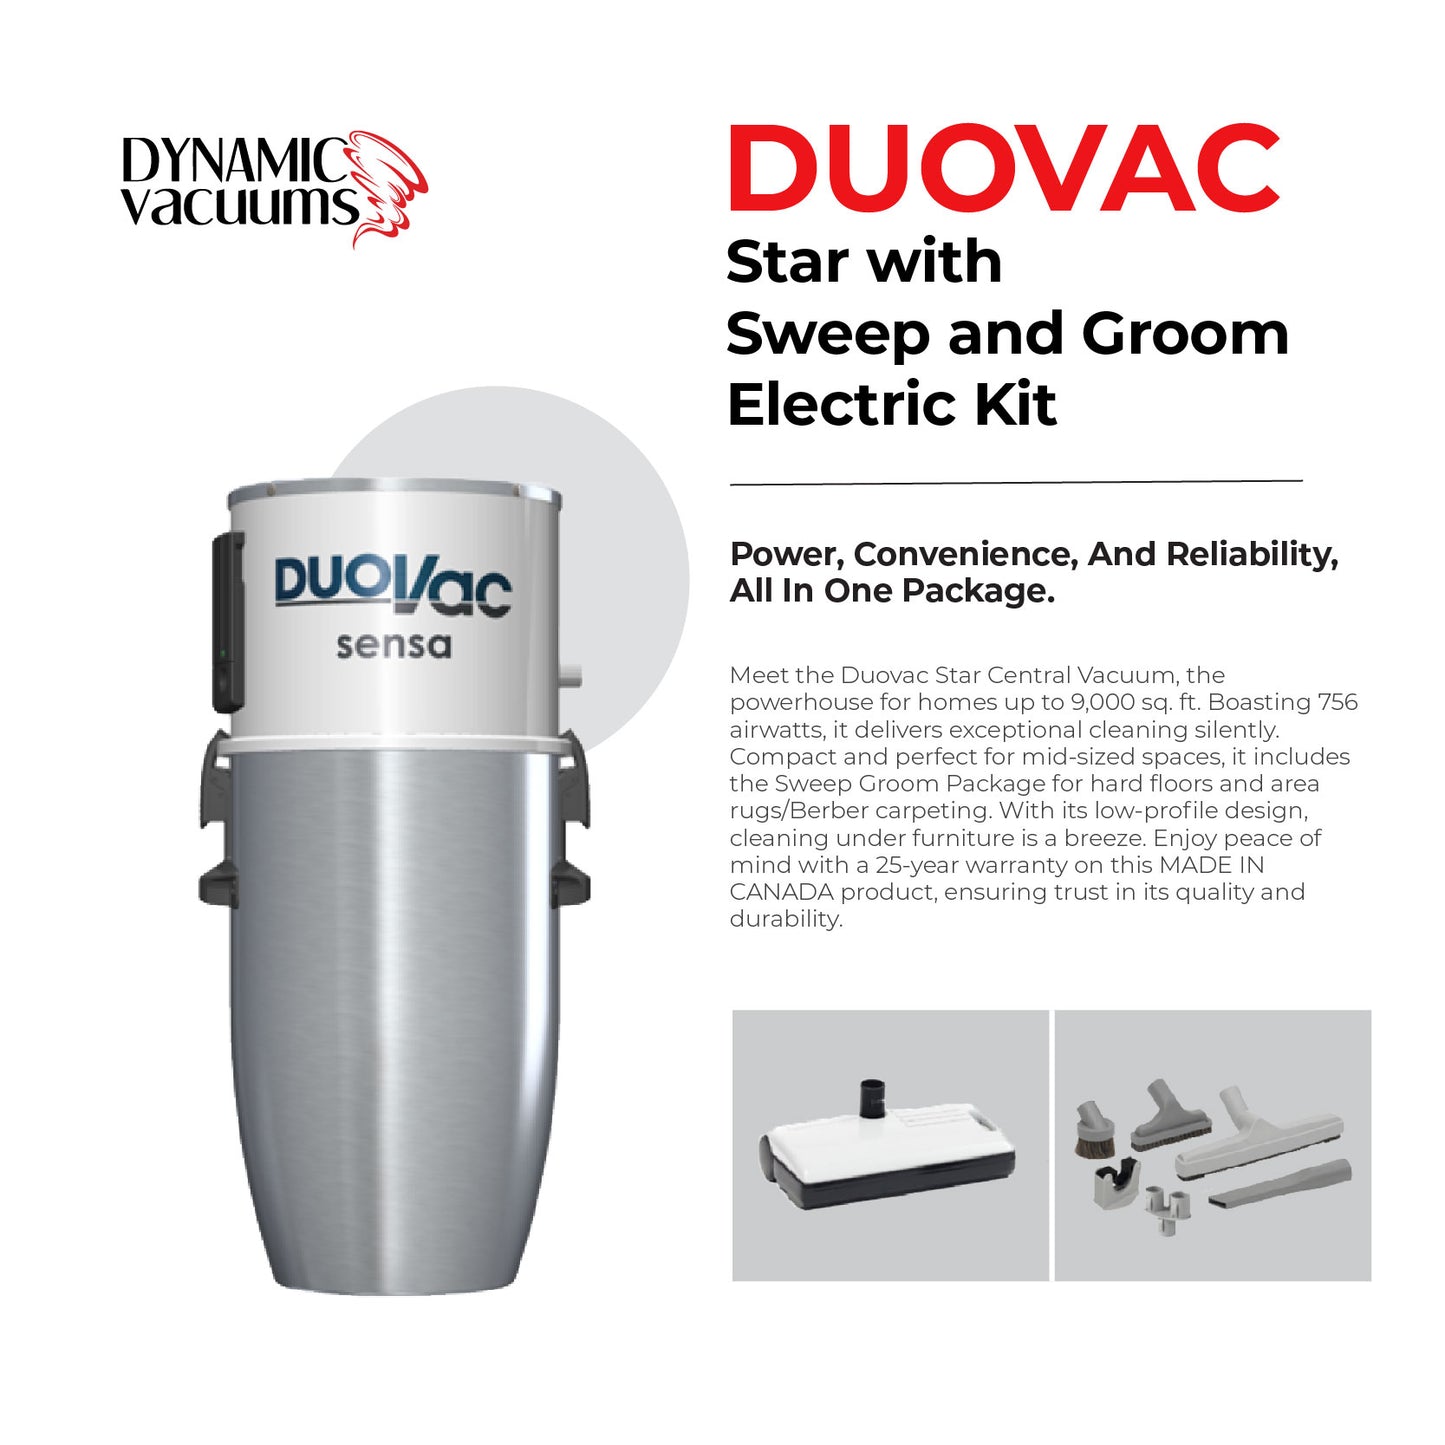 Duovac Star with Sweep and Groom Electric Kit